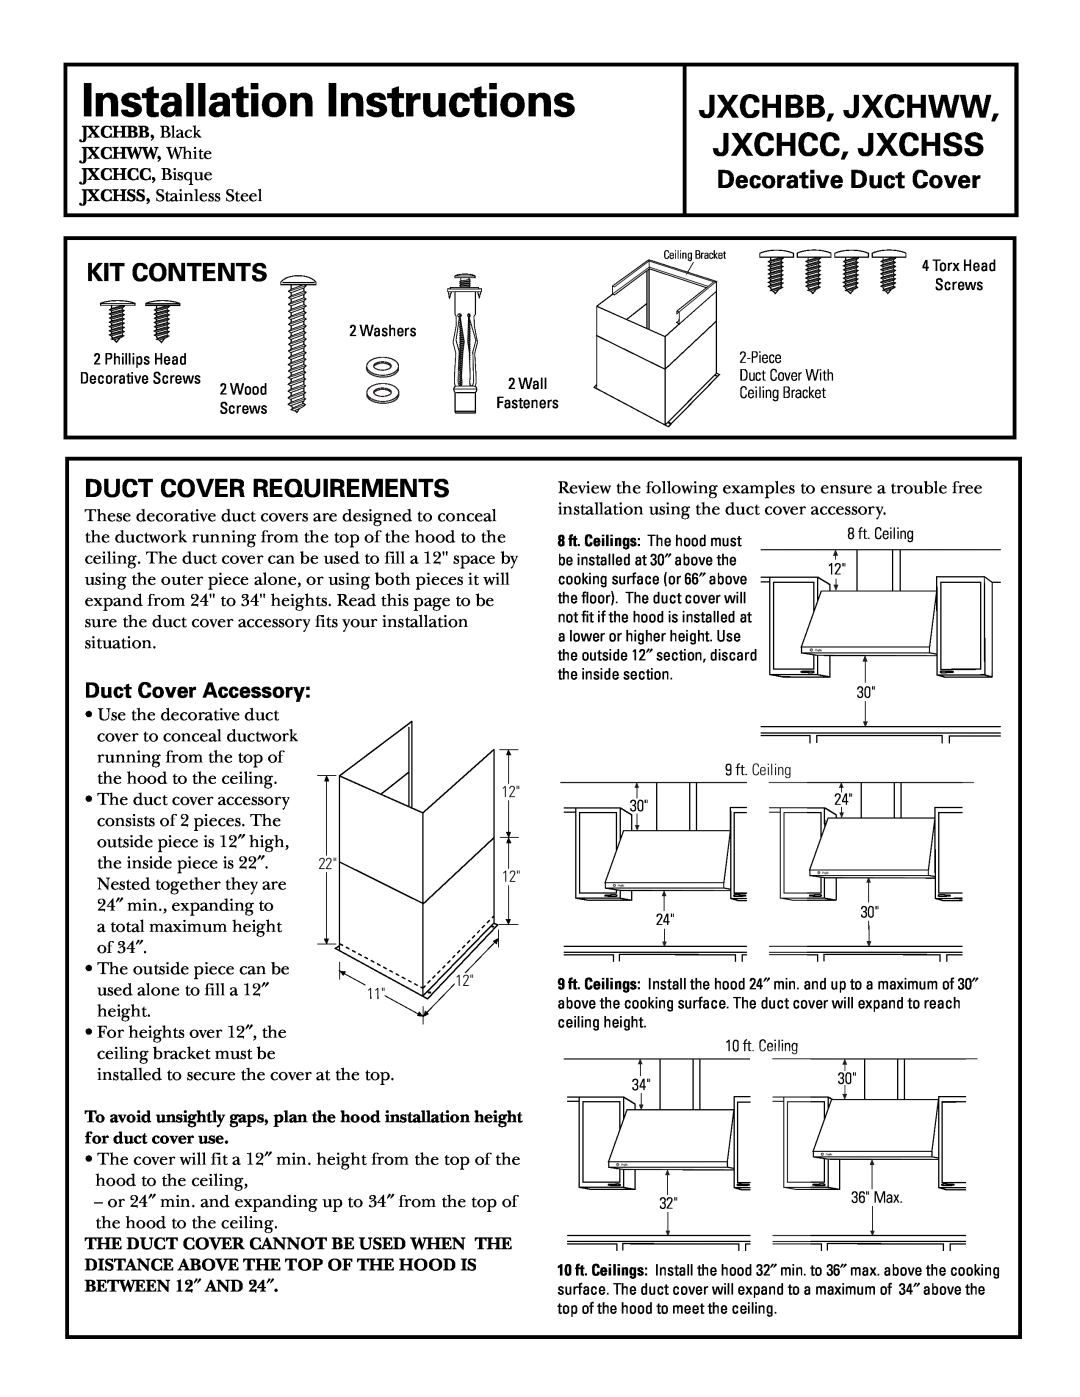 GE JXCHCC installation instructions Decorative Duct Cover, Kit Contents, Duct Cover Requirements, Duct Cover Accessory 